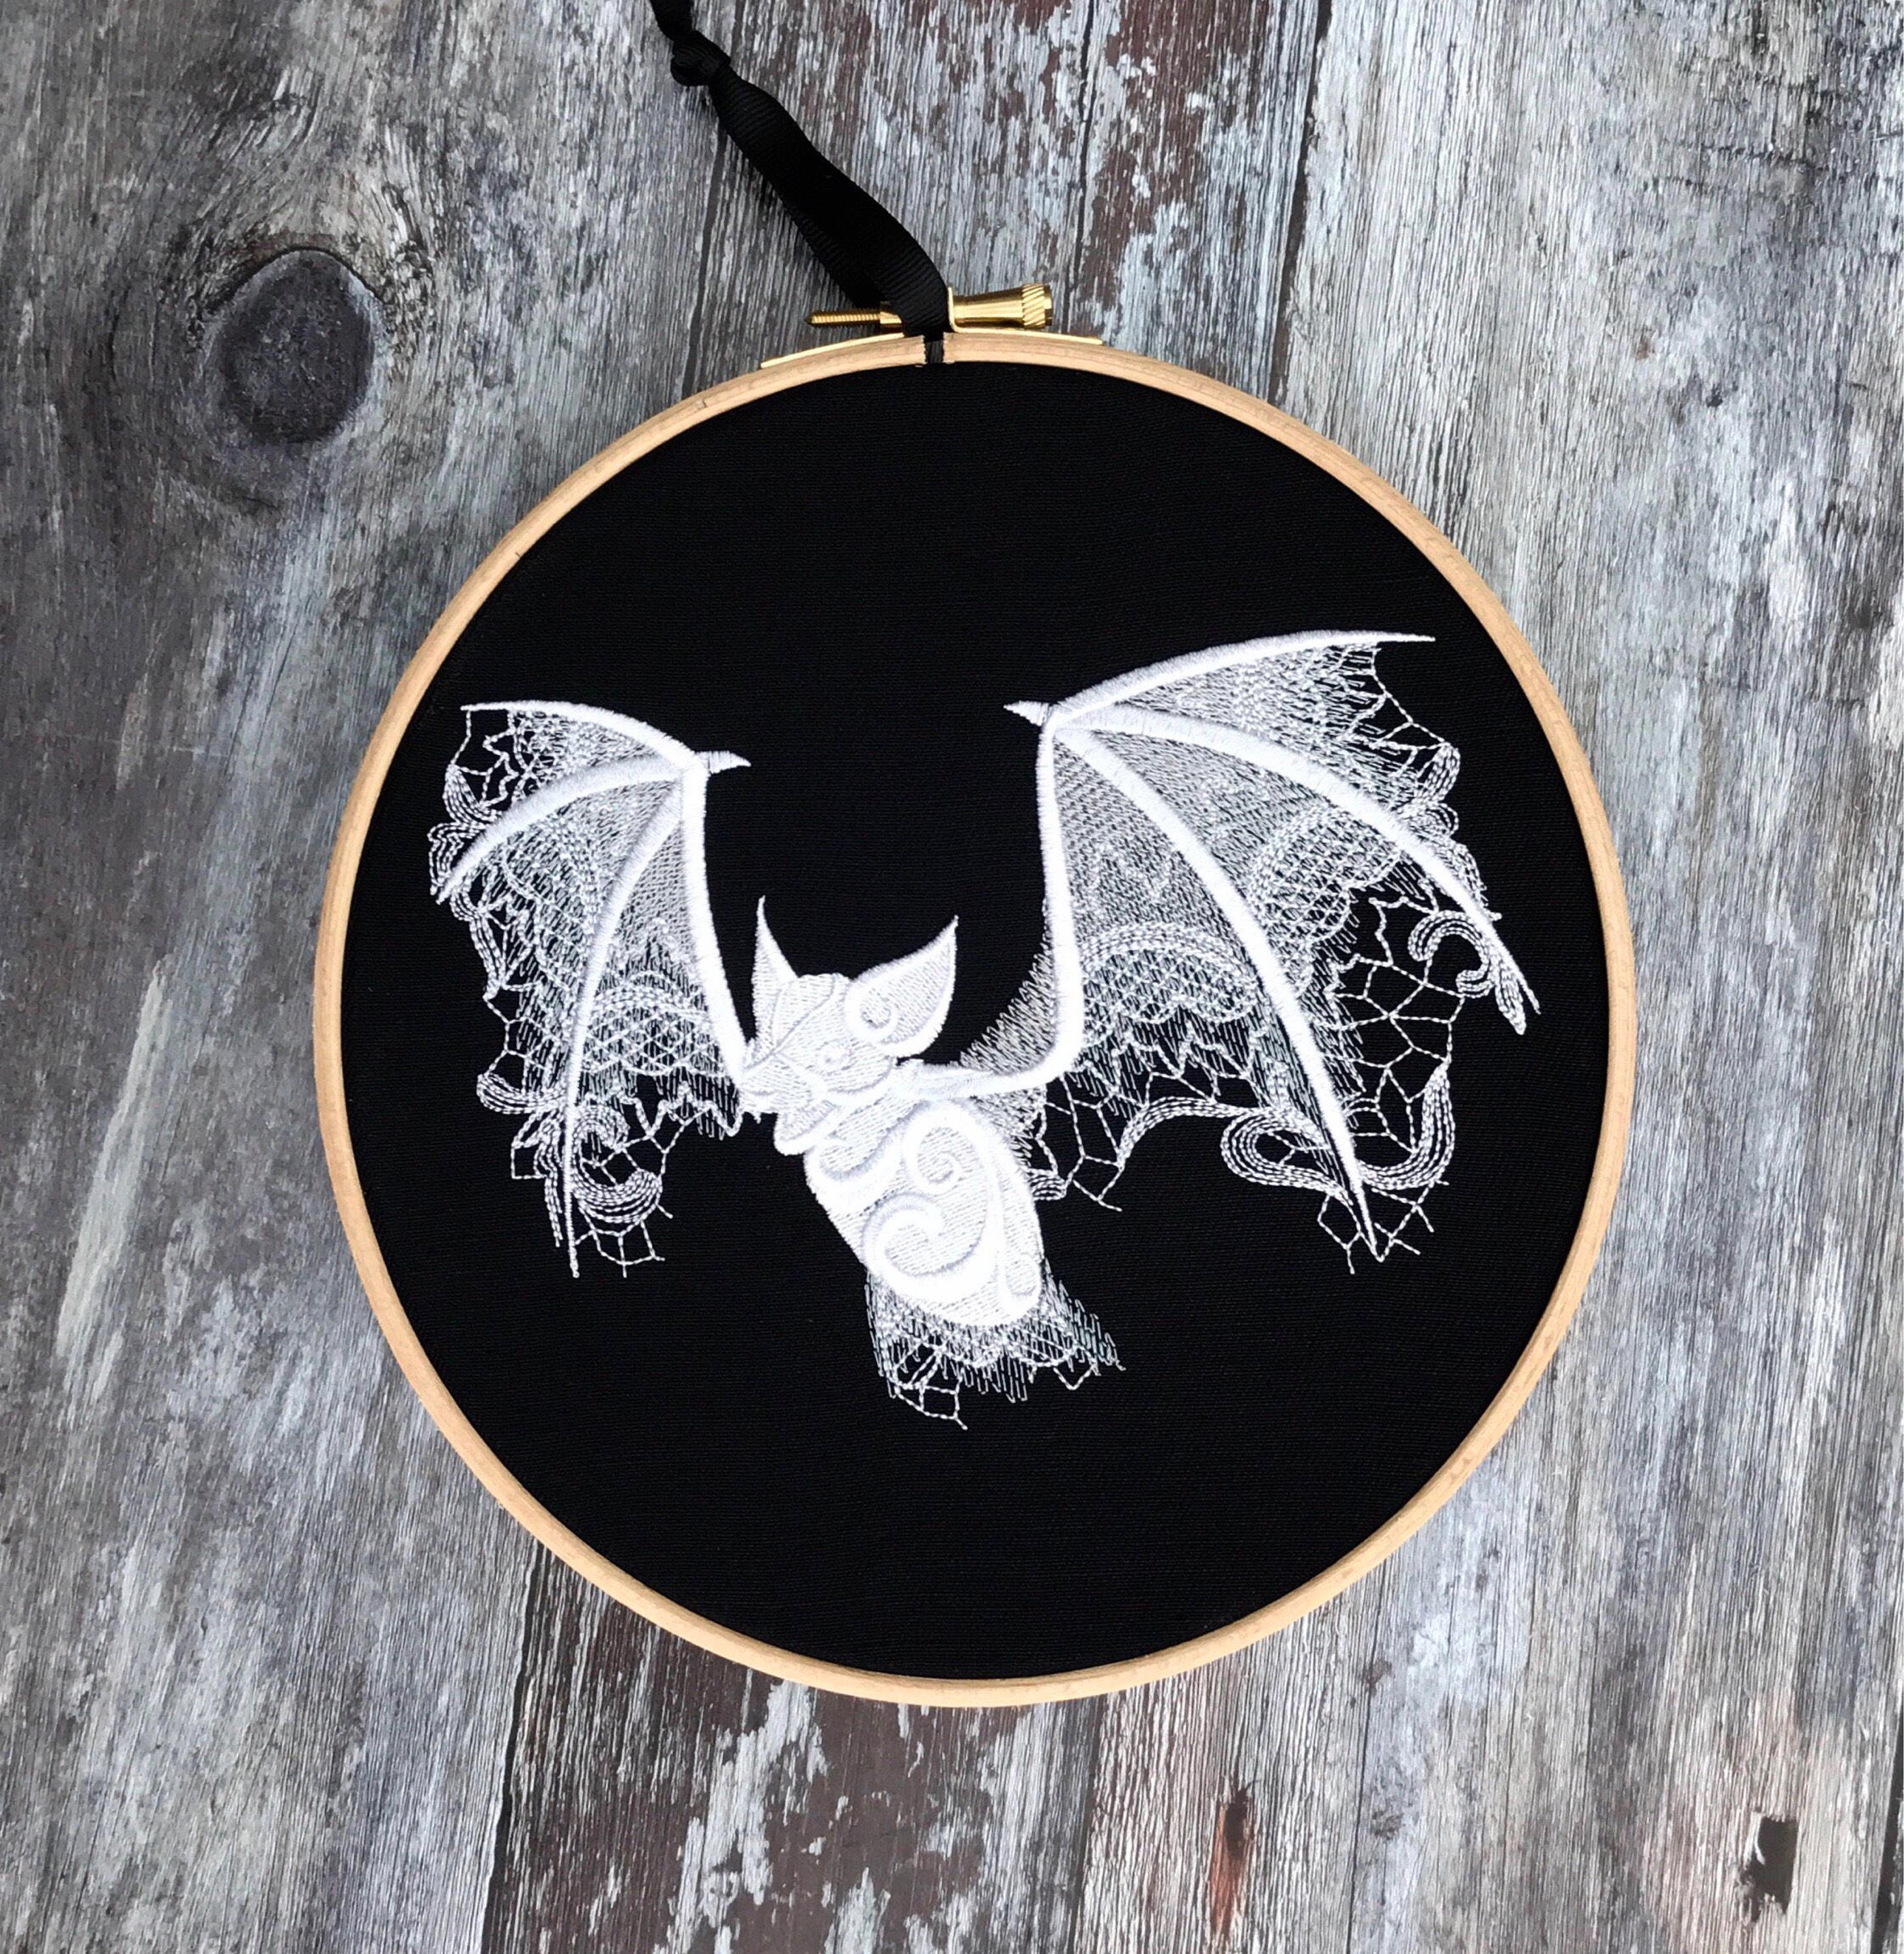 Inchoo Bijoux Holiday Gifts Goth Stitches of Anarchy Bat Embroidery